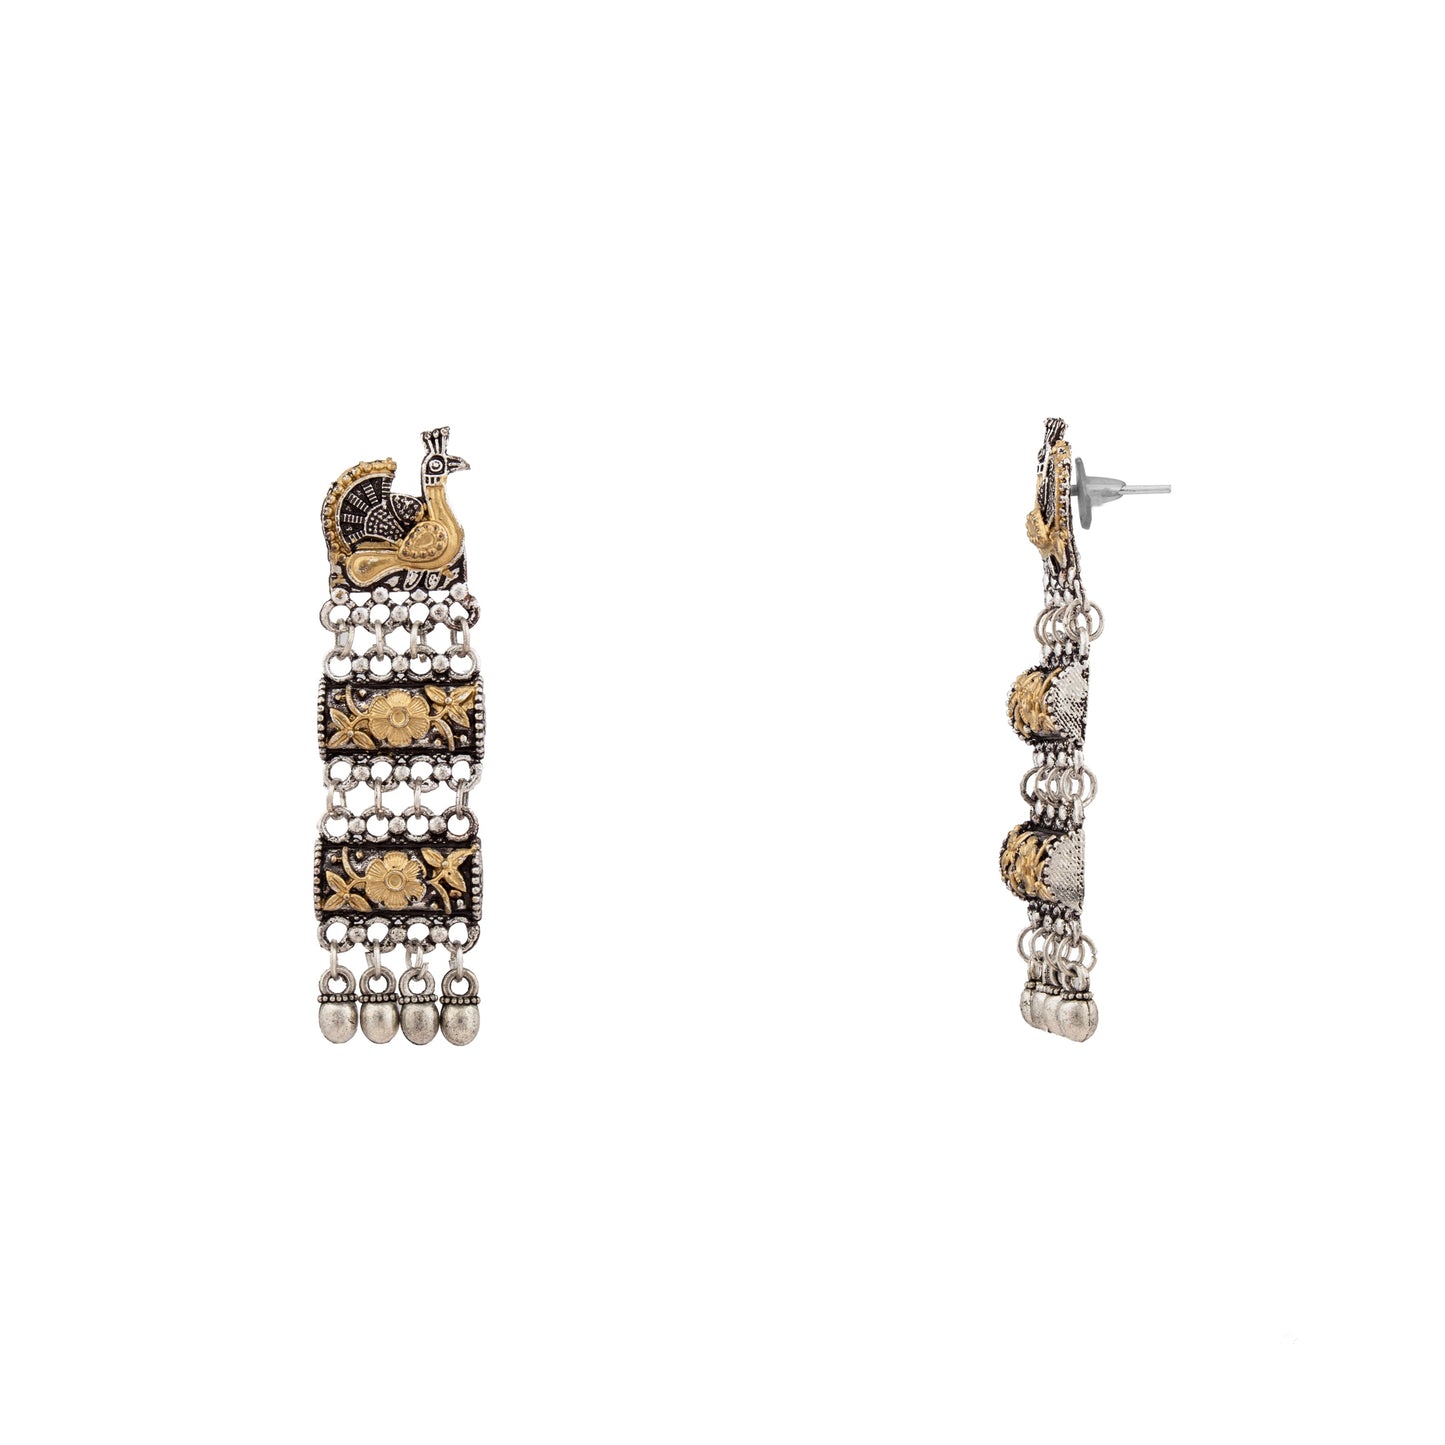 Antique Two tone Gold & Silver Plated Oxidised Afghani Peacock Drop Earrings for Women & Girls  (SJ_1533)